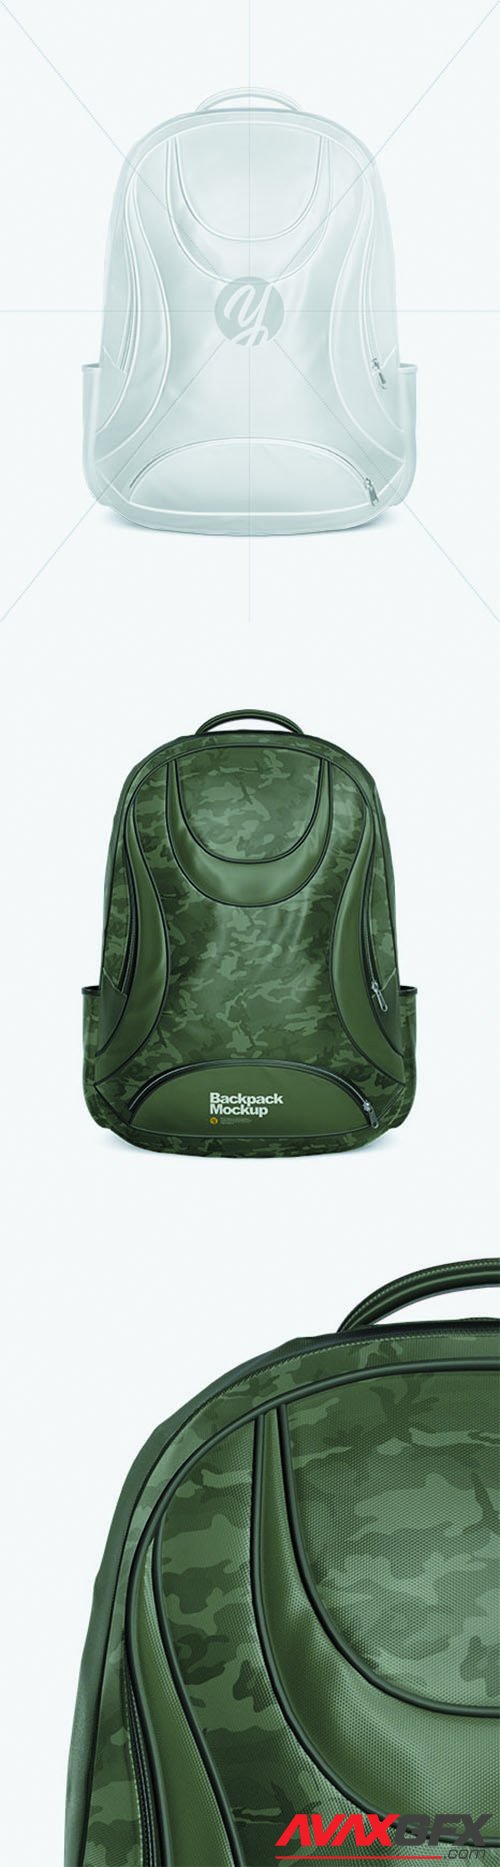 Backpack Mockup - Front View 62689